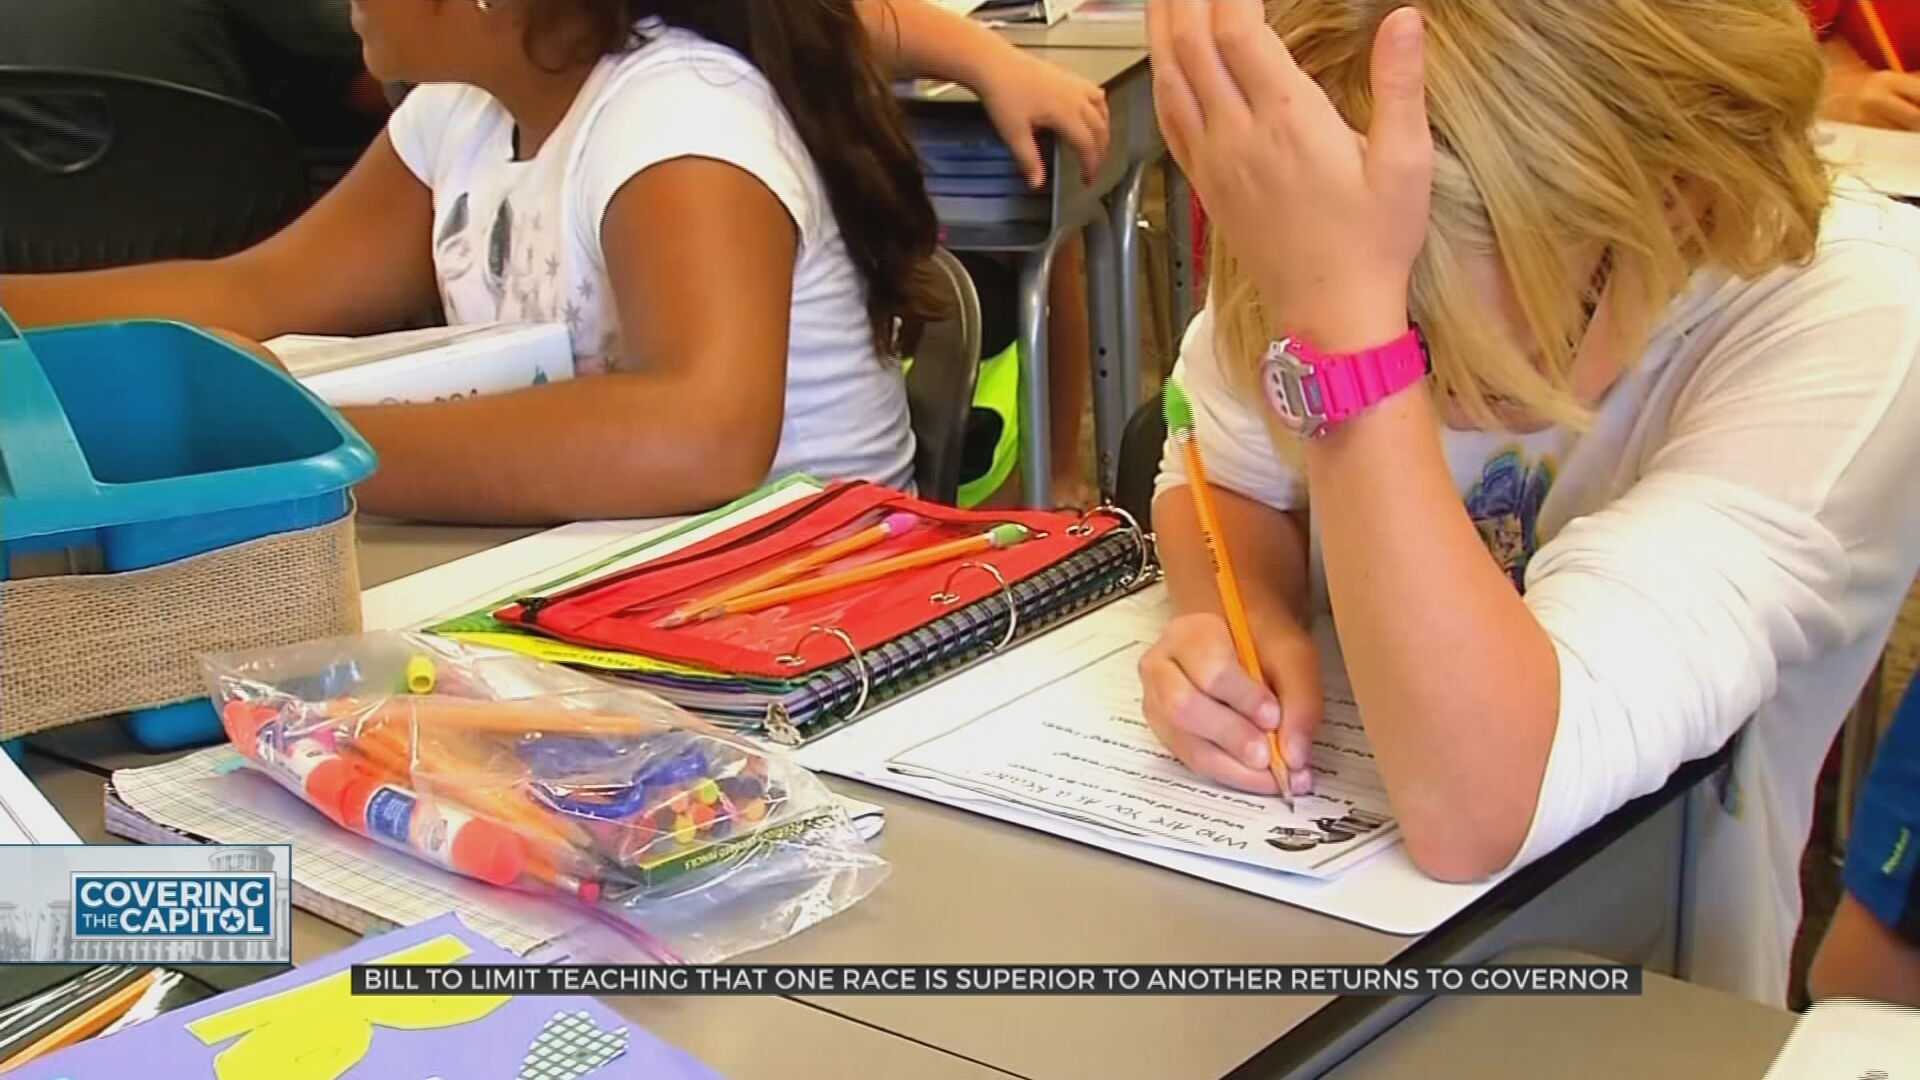 Bill Limiting Race, Gender Curriculum Returns to Governor's Desk